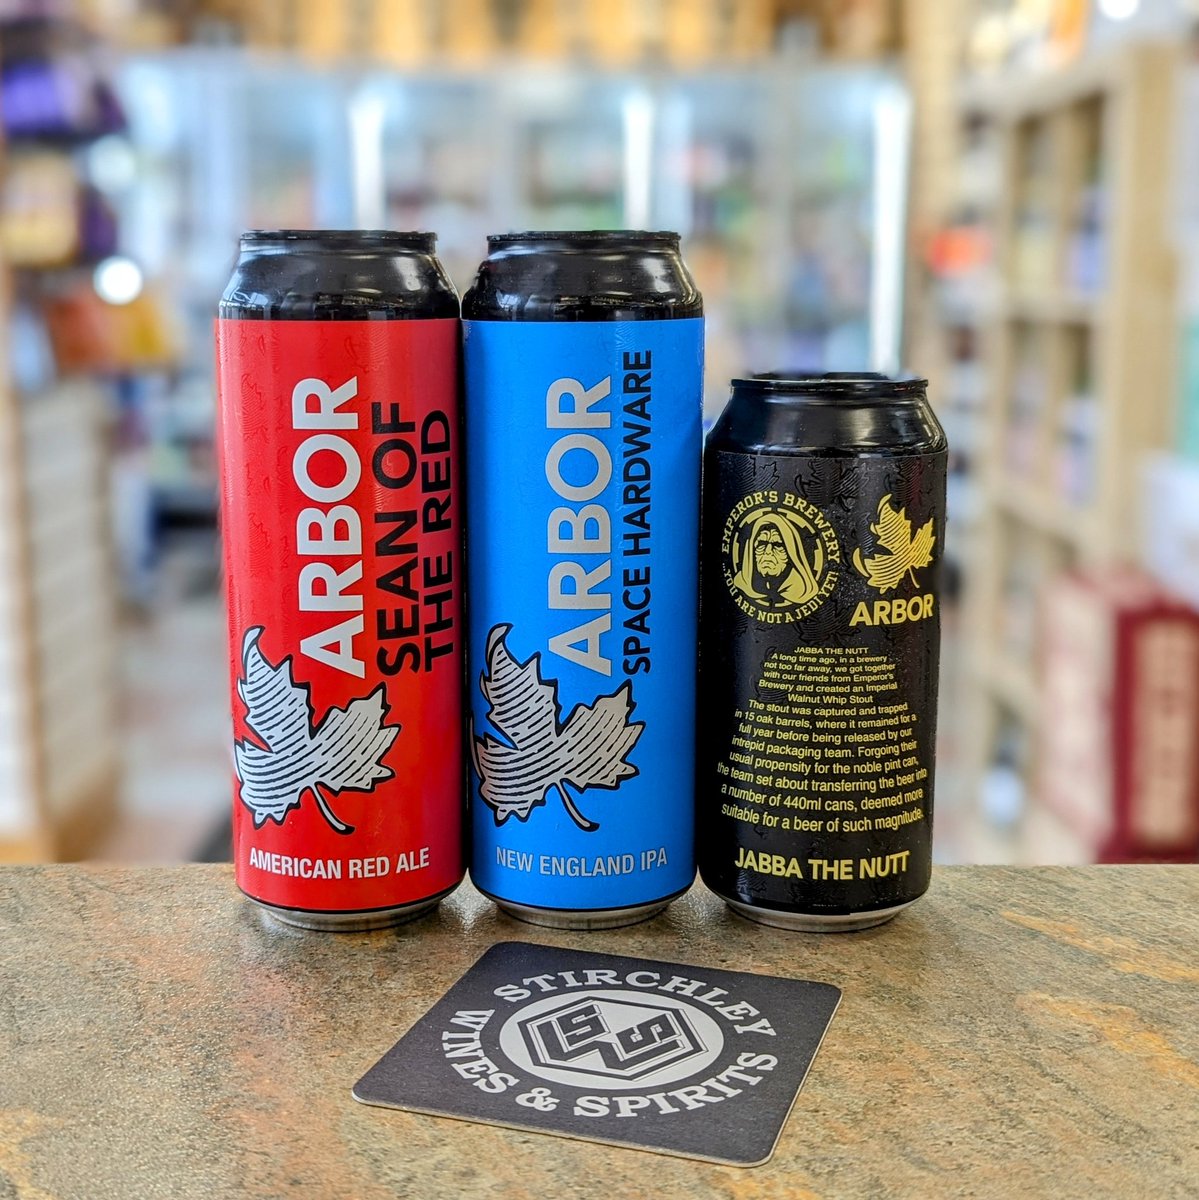 A few new additions to our range of beers from Bristol based @arborales... 🍺 Sean of the Red 5.1% American Red Ale 🍺 Space Hardware 6.6% New England IPA 🍺 Jabba the Nutt 10% Walnut Whip Imperial Stout /w @EmperorsBrewery #VivaStirchley #VivaBrum #ShopIndependent